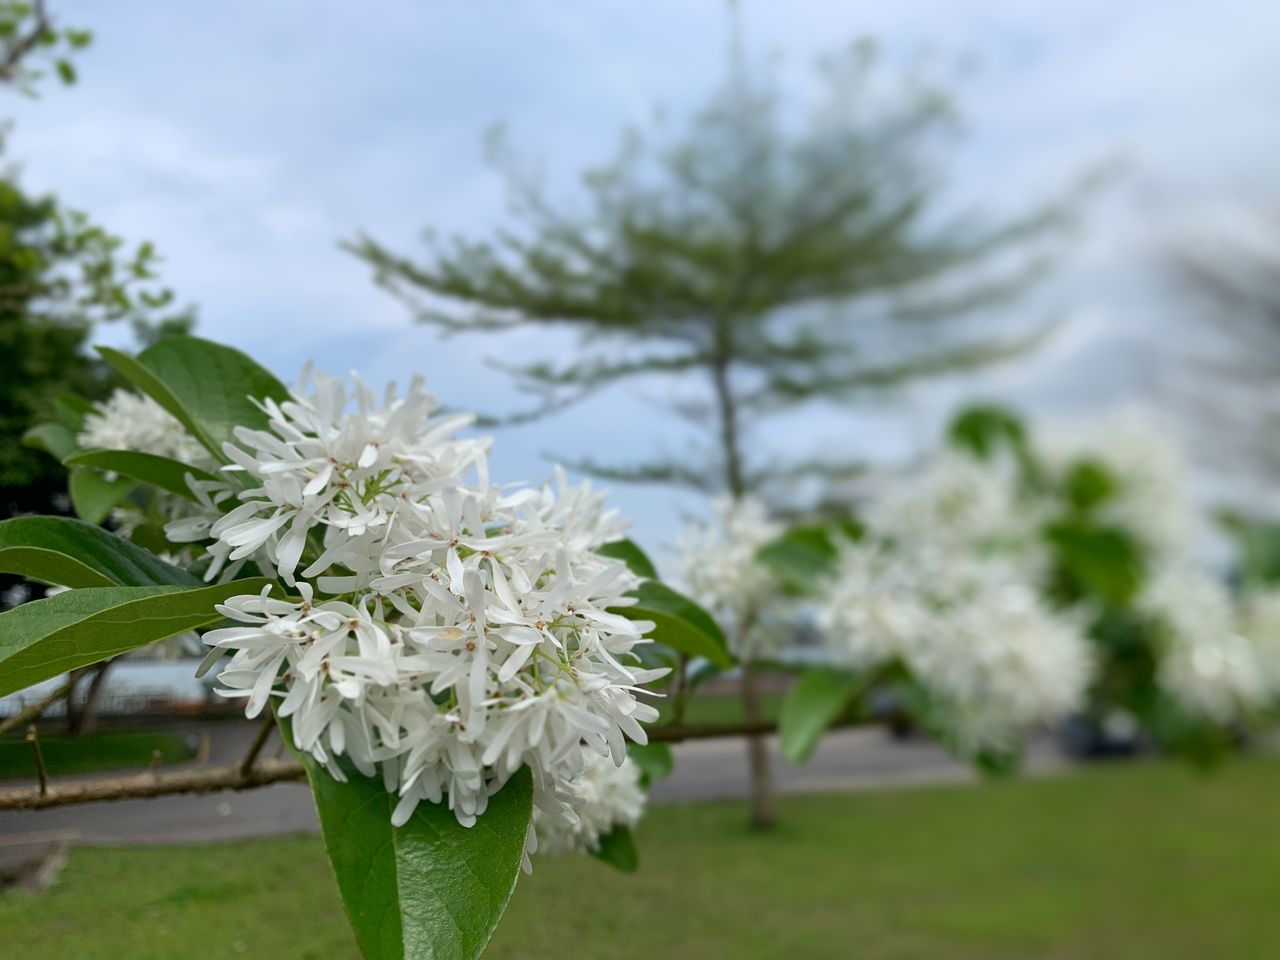 CLOSE-UP OF WHITE FLOWERING PLANT AGAINST TREE